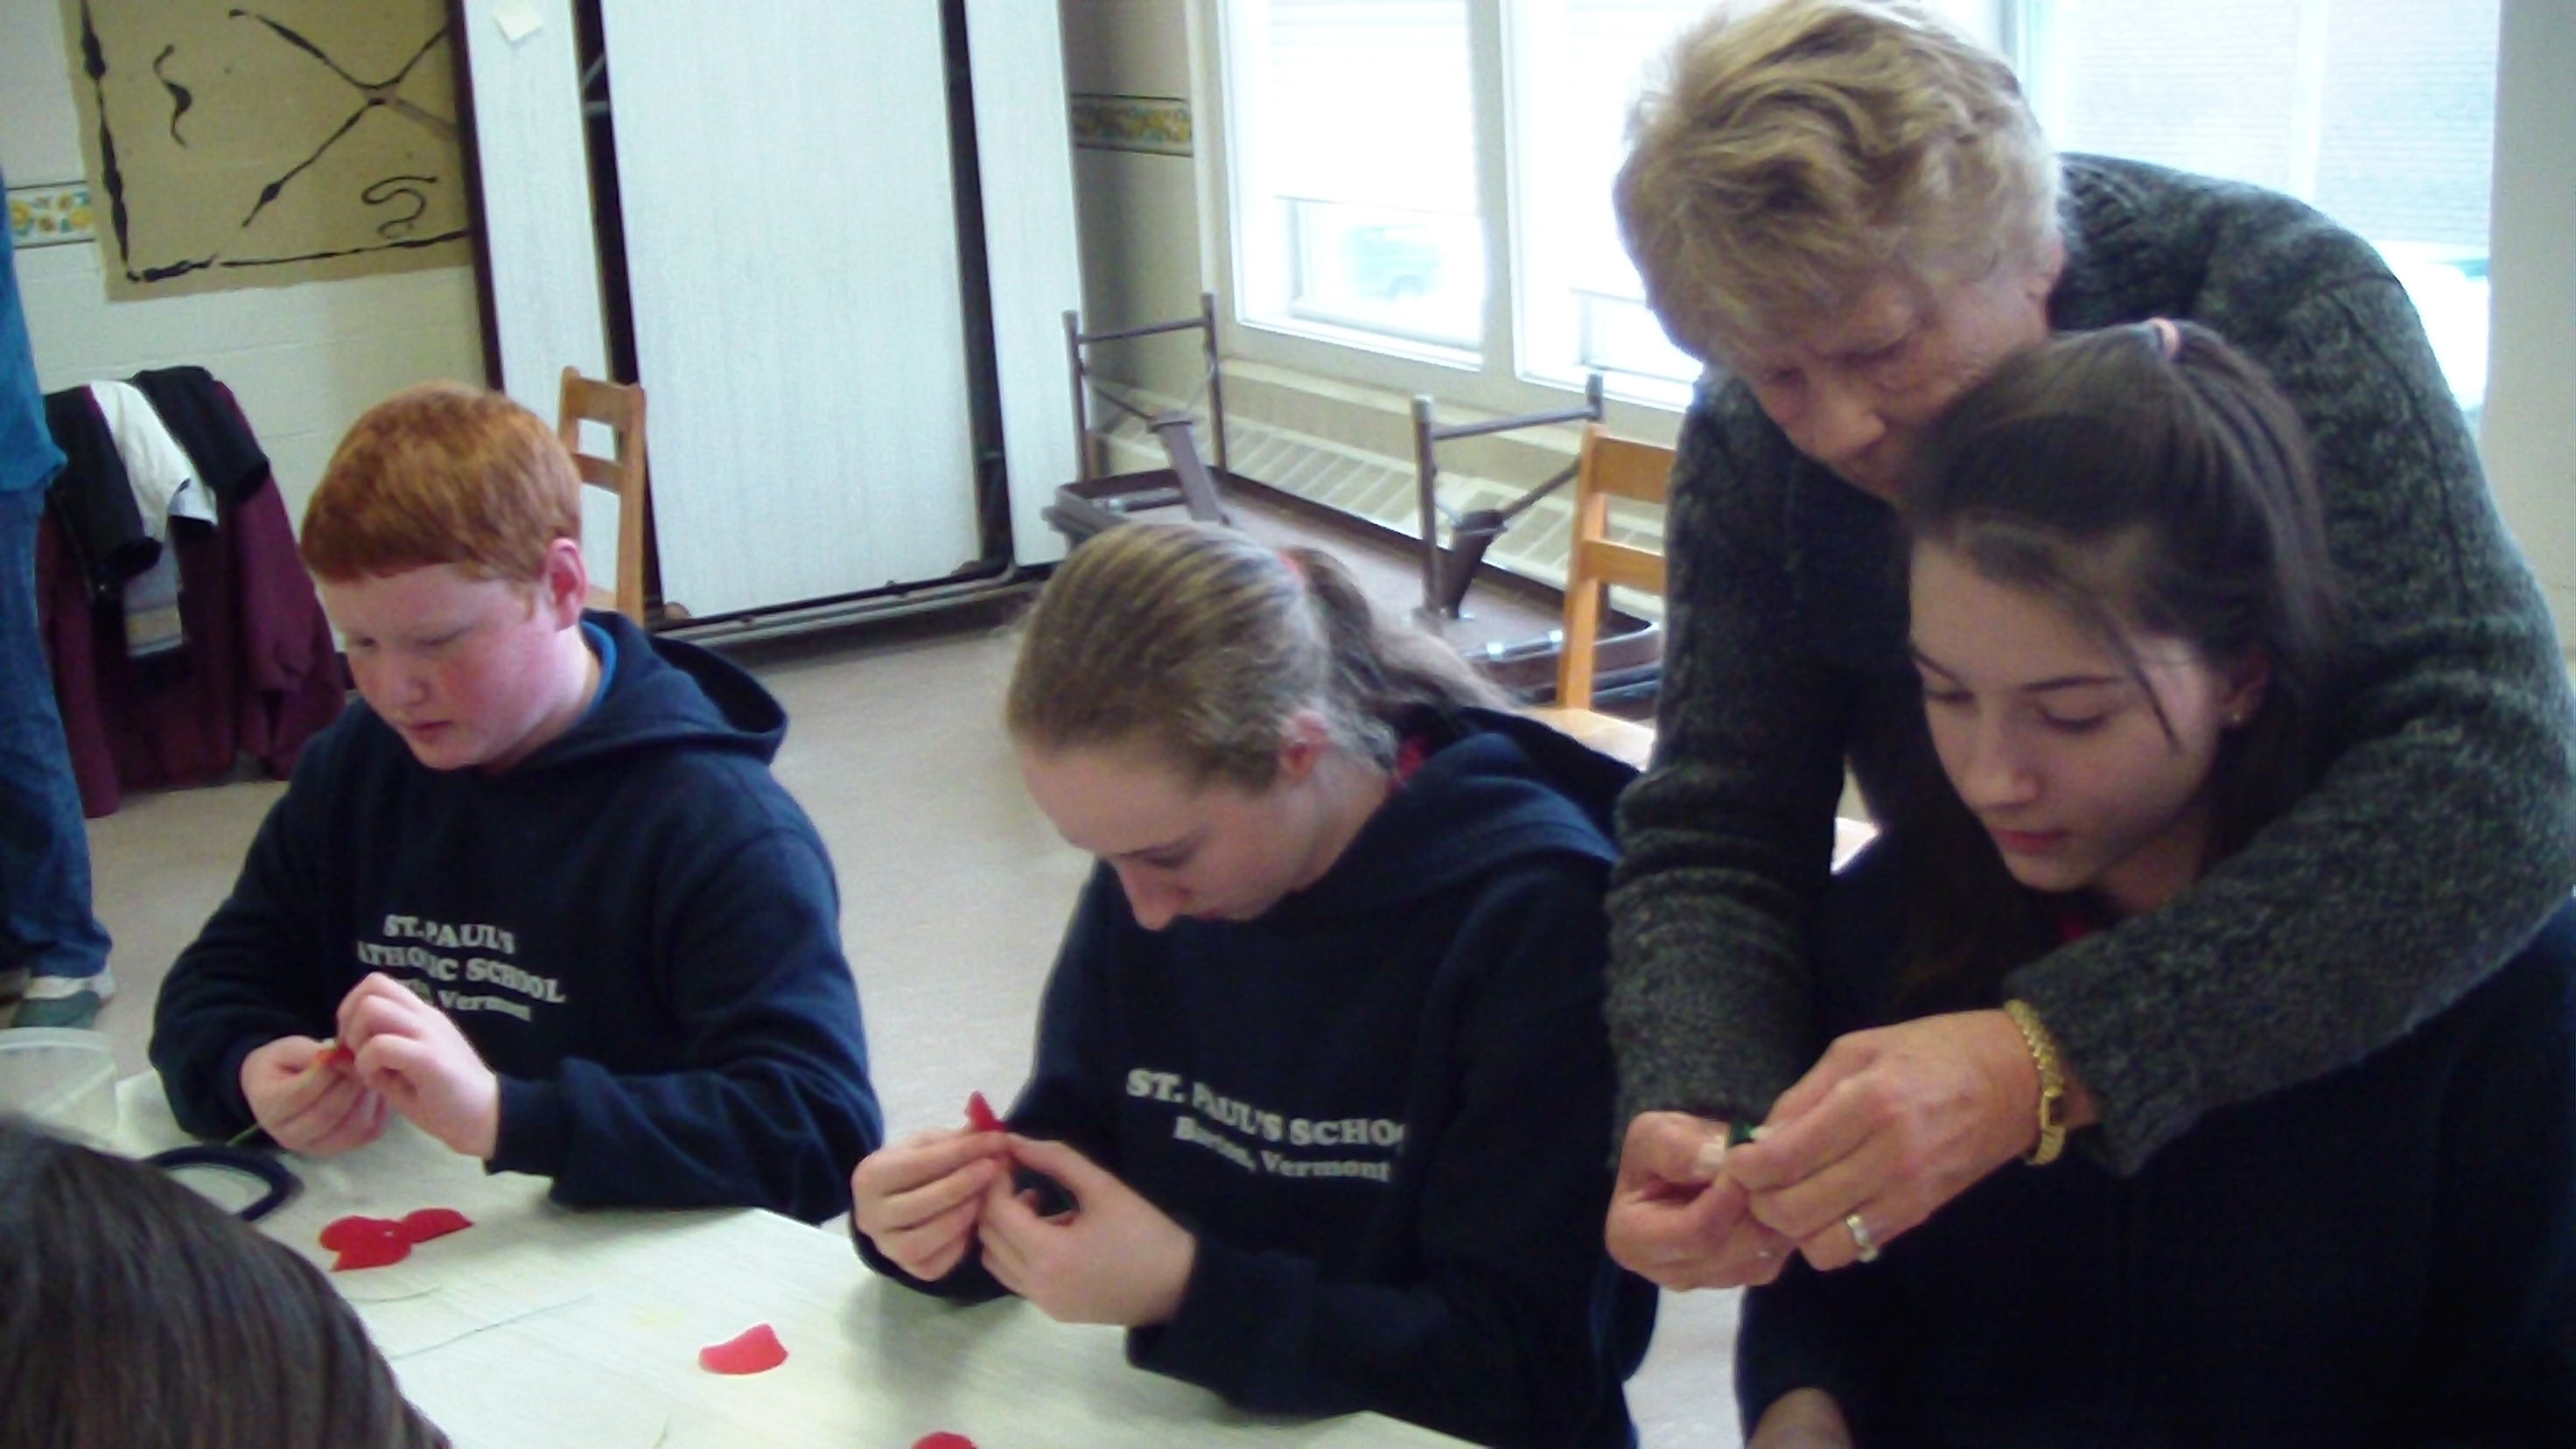 7th and 8th graders making poppies with members of the American Legion Aux.